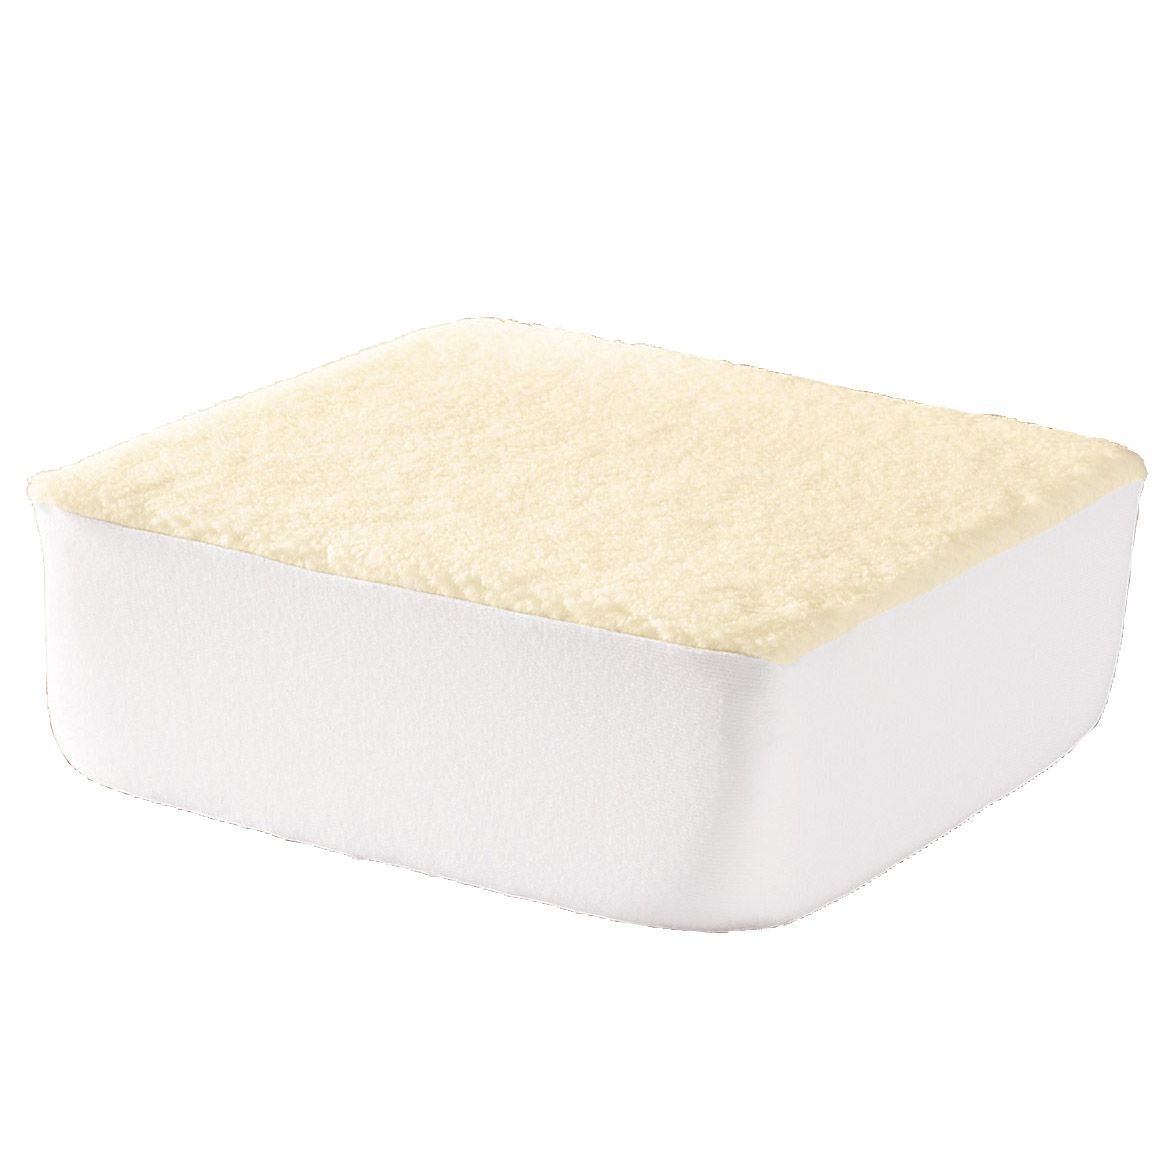 Extra Thick Foam Cushion by LivingSURE™ + '-' + 302544